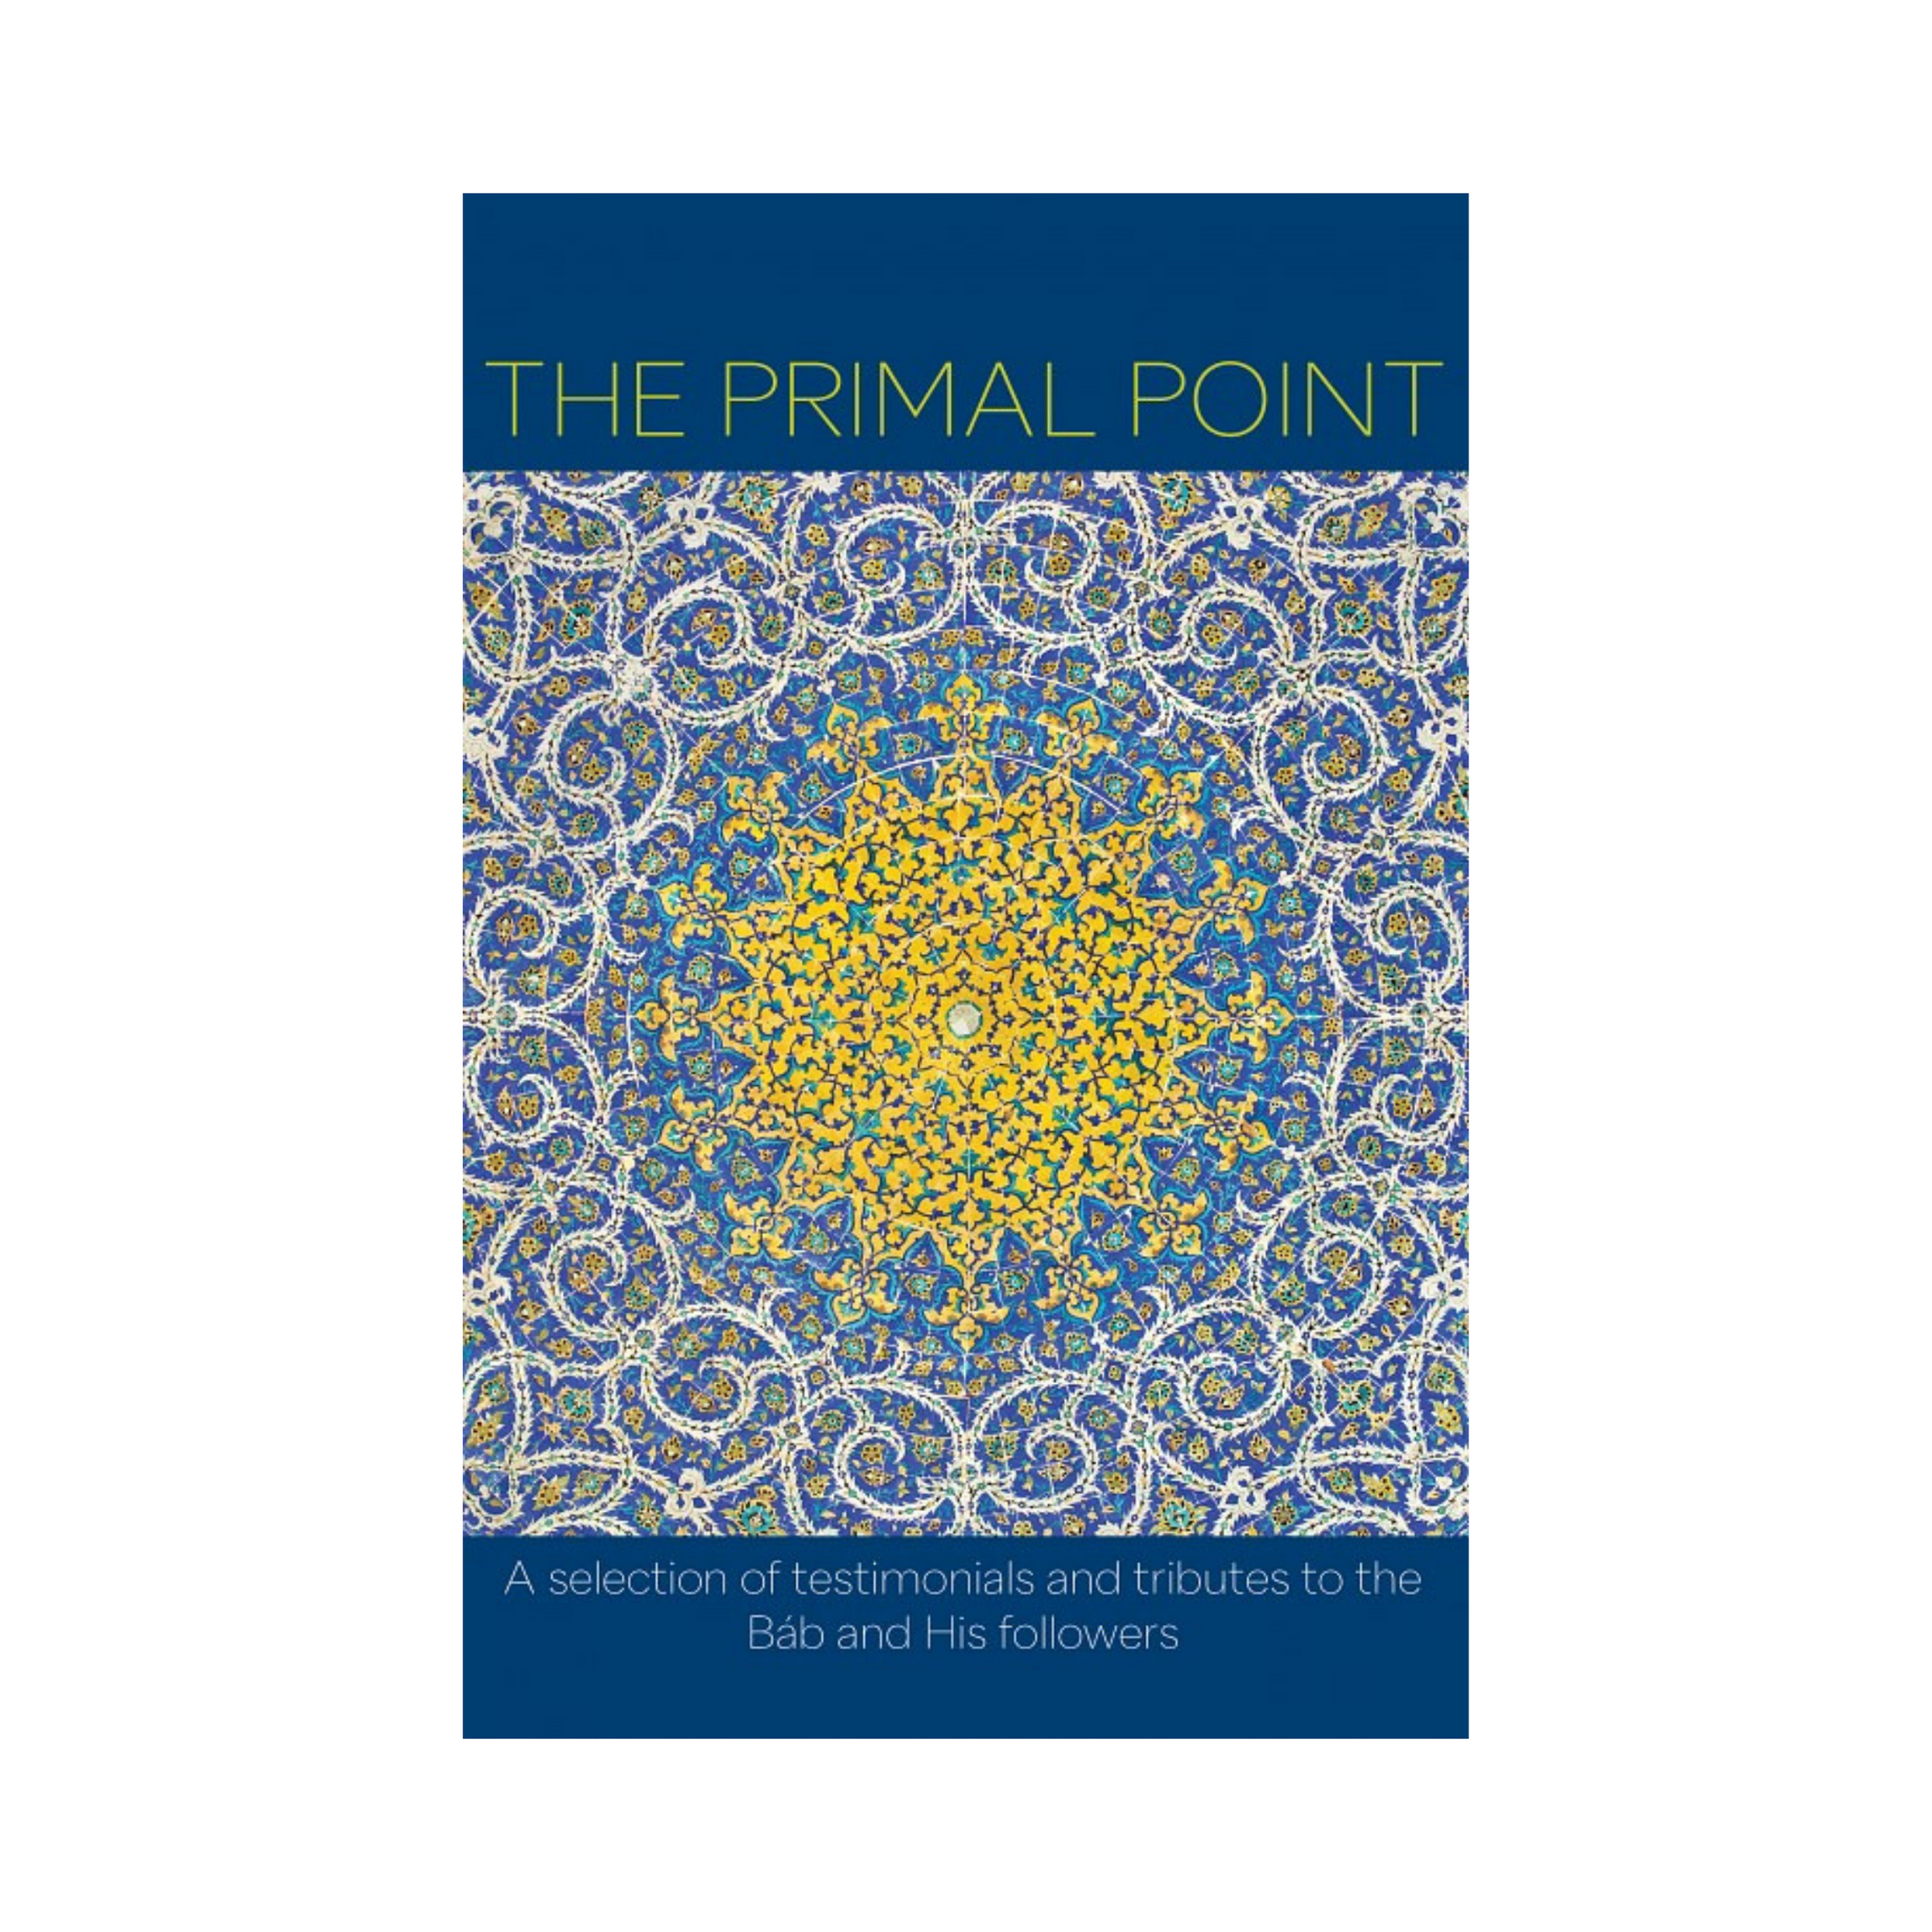 Primal Point - A selection of testimonials and tributes to the Bab and His followers